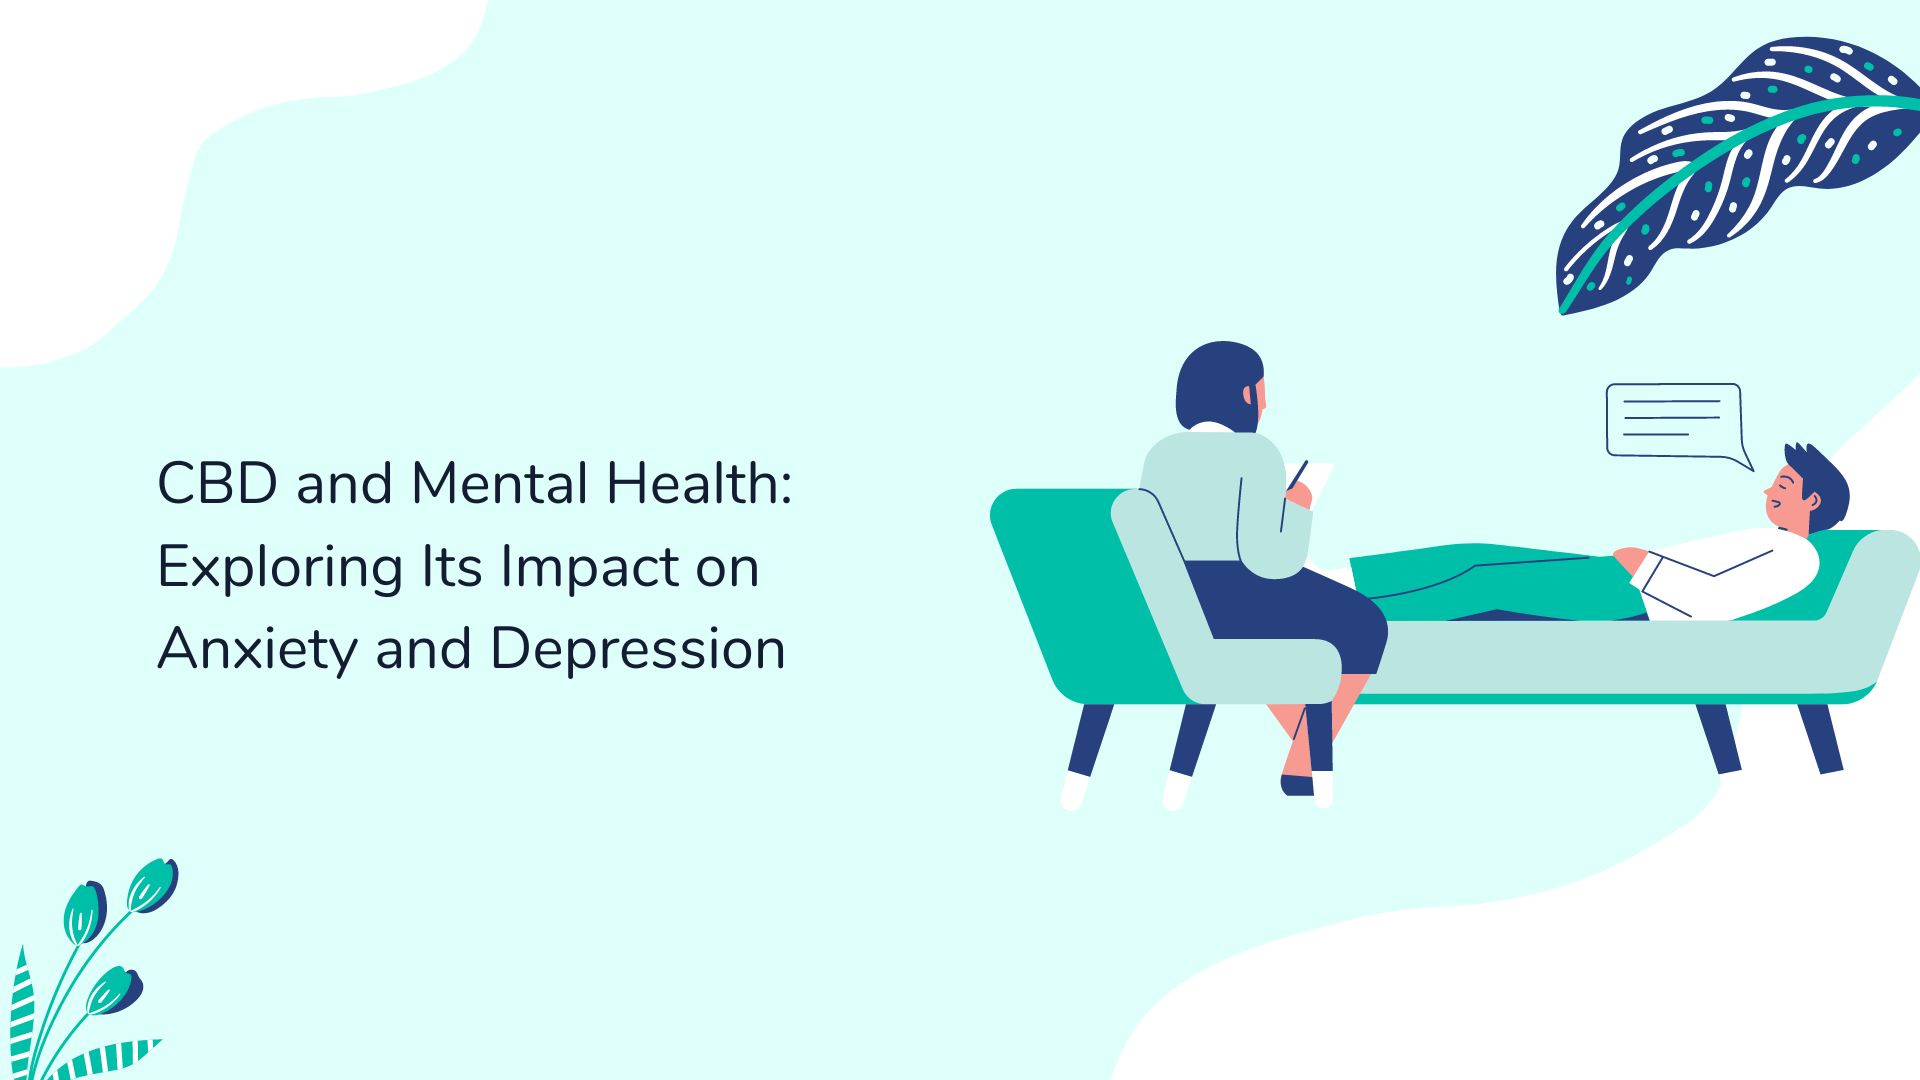 CBD and Mental Health: Exploring Its Impact on Anxiety and Depression